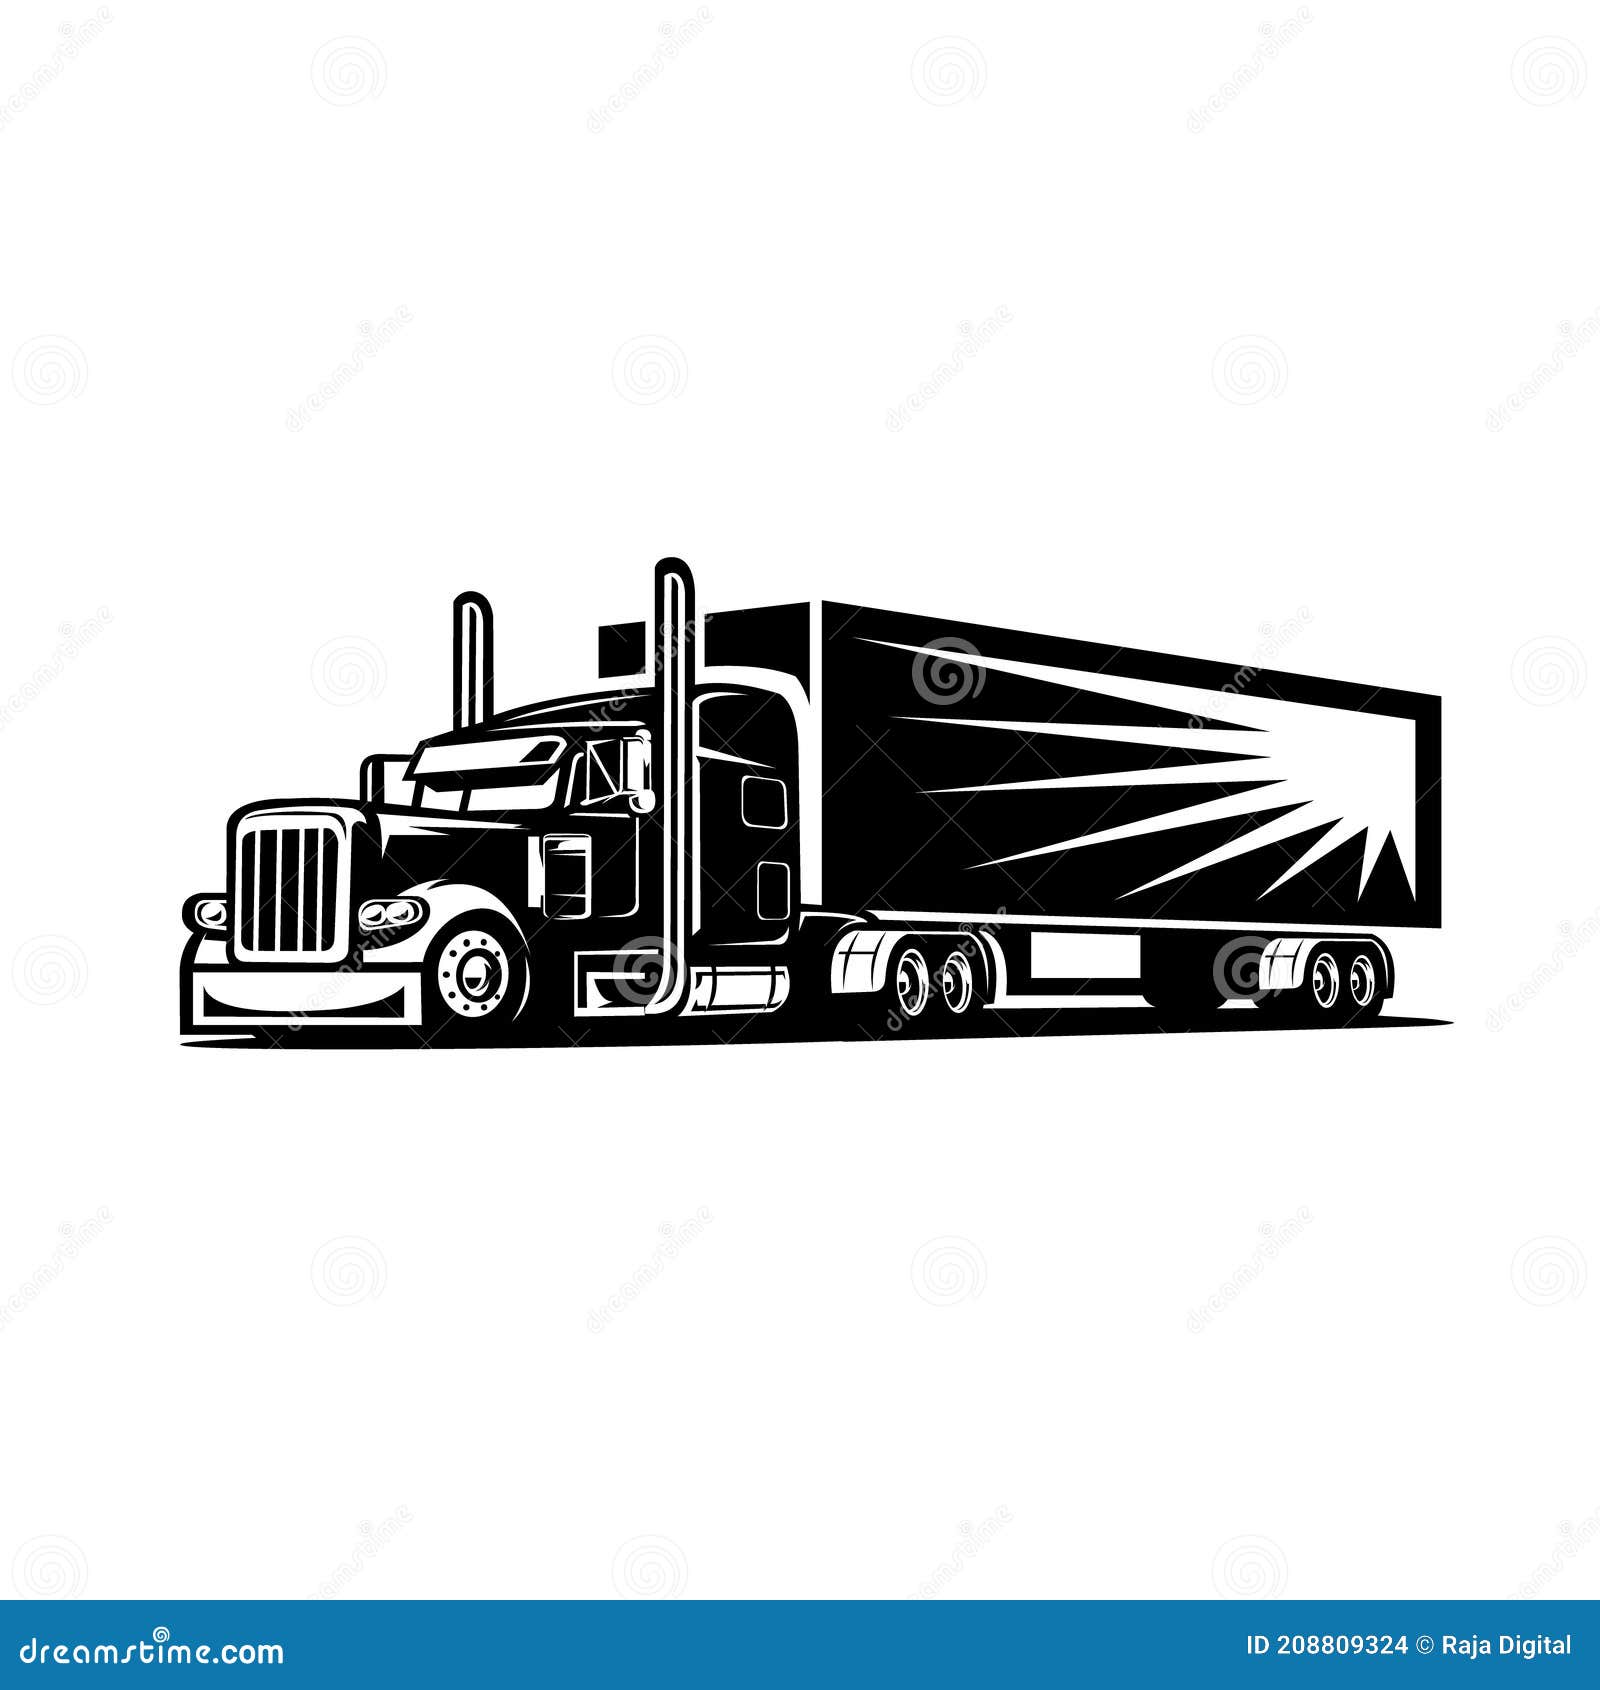 silhouette of semi truck 18 wheeler with trailer side view  image 